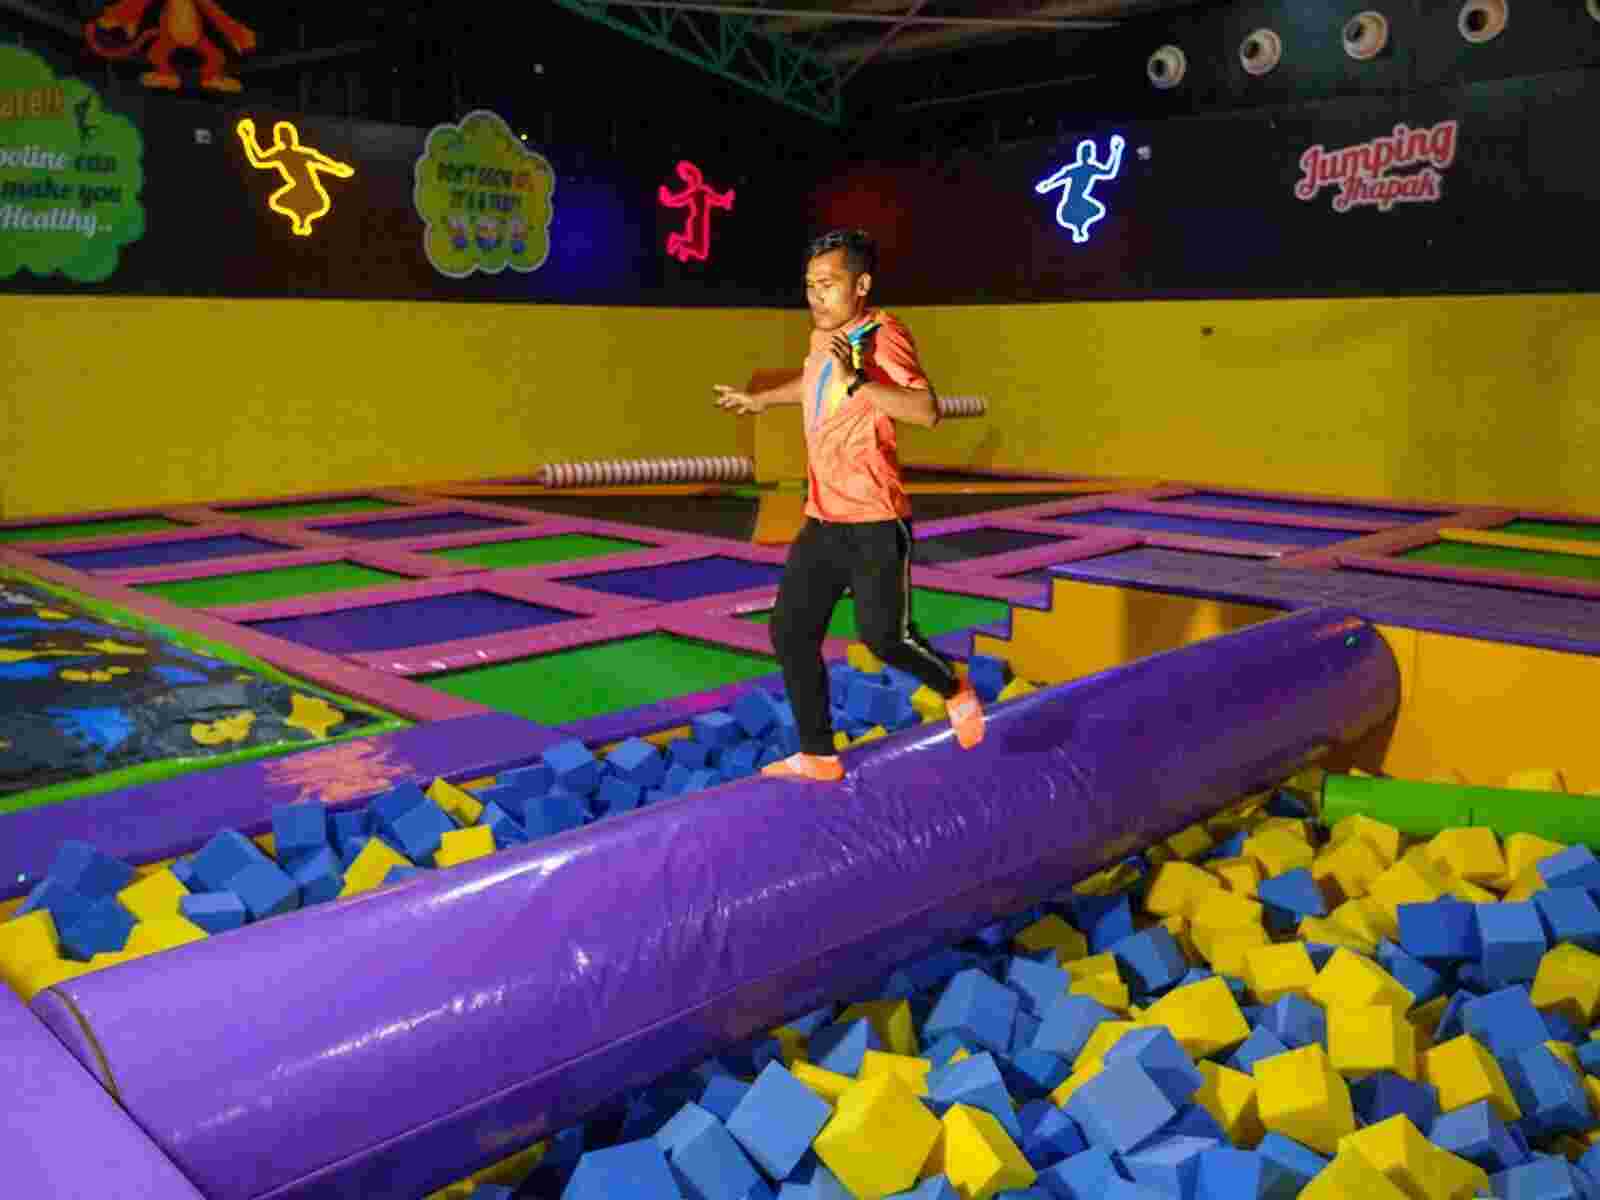 5 Fun and Challenging Jumping Activities that you must do at SkyJumper Trampoline Park